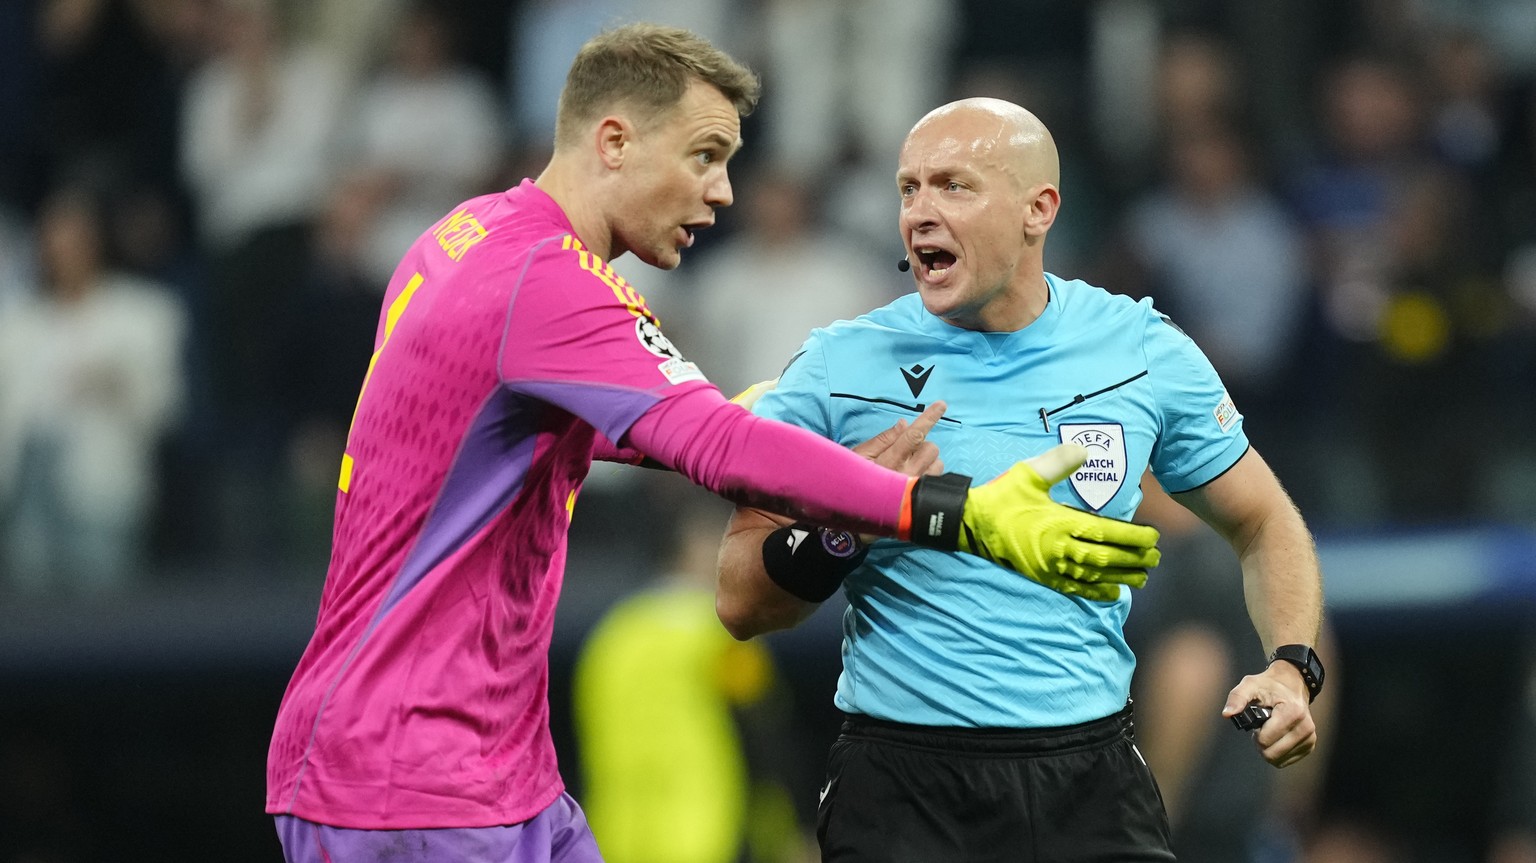 Bayern&#039;s goalkeeper Manuel Neuer, left, talks with referee Szymon Marciniak during the Champions League semifinal second leg soccer match between Real Madrid and Bayern Munich at the Santiago Ber ...